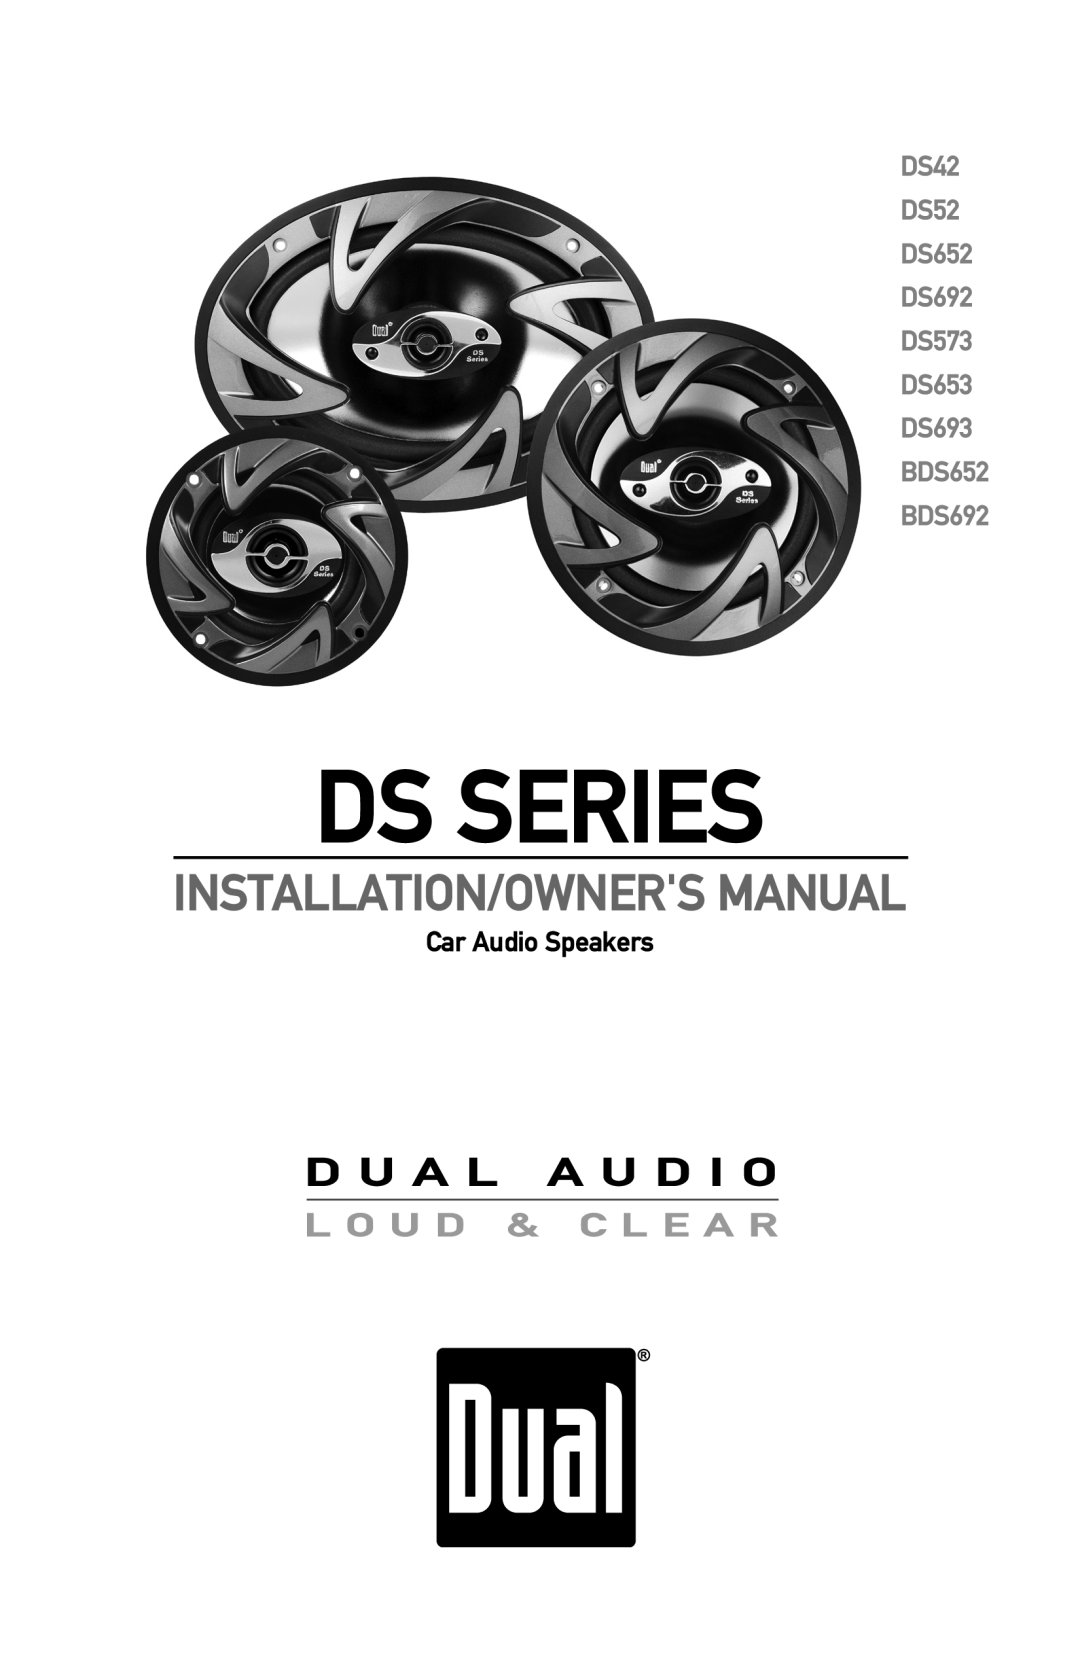 Dual owner manual Ds Series, Installation/Owners Manual, DS42 DS52 DS652 DS692 DS573 DS653 DS693 BDS652 BDS692 